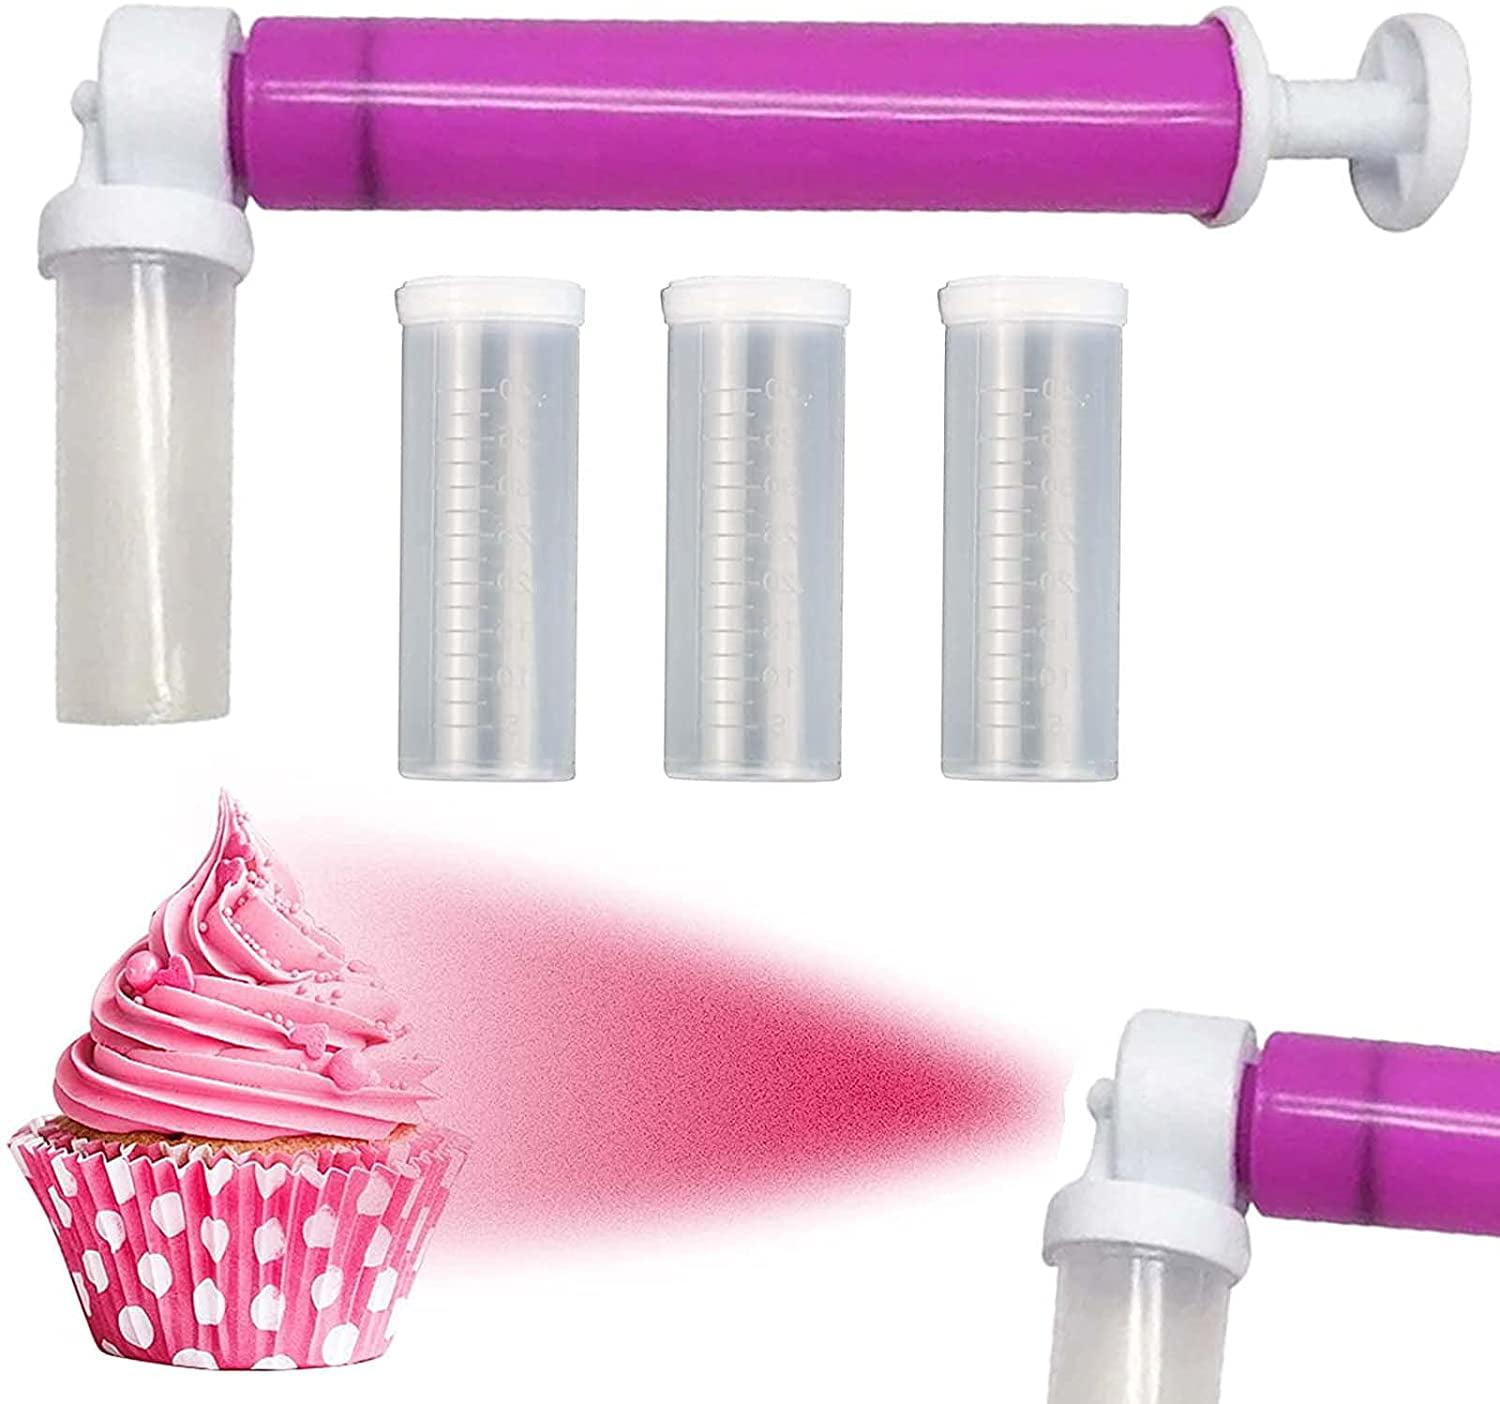 Manual Airbrush by Hobbycor  Easily transform your cakes! –